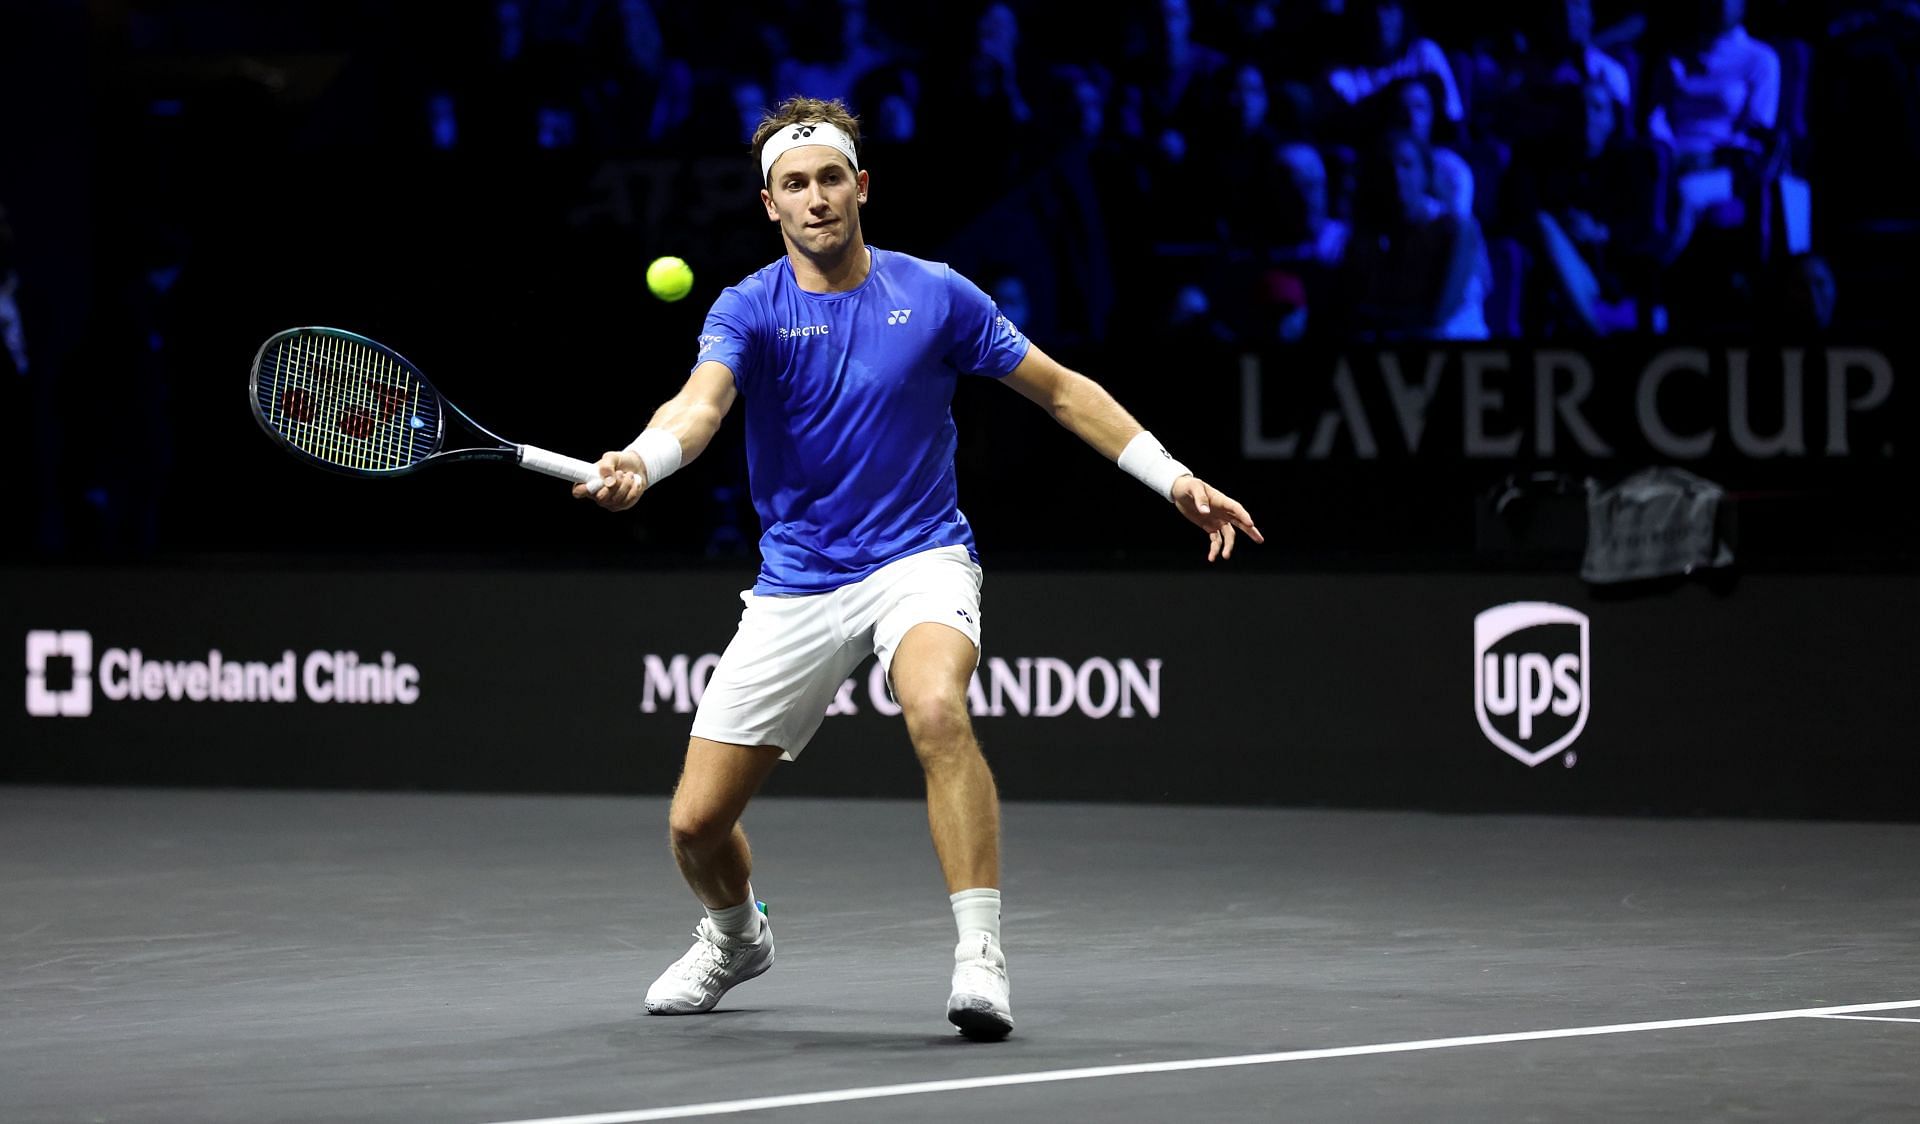 Casper Ruud in action at the Laver Cup 2022